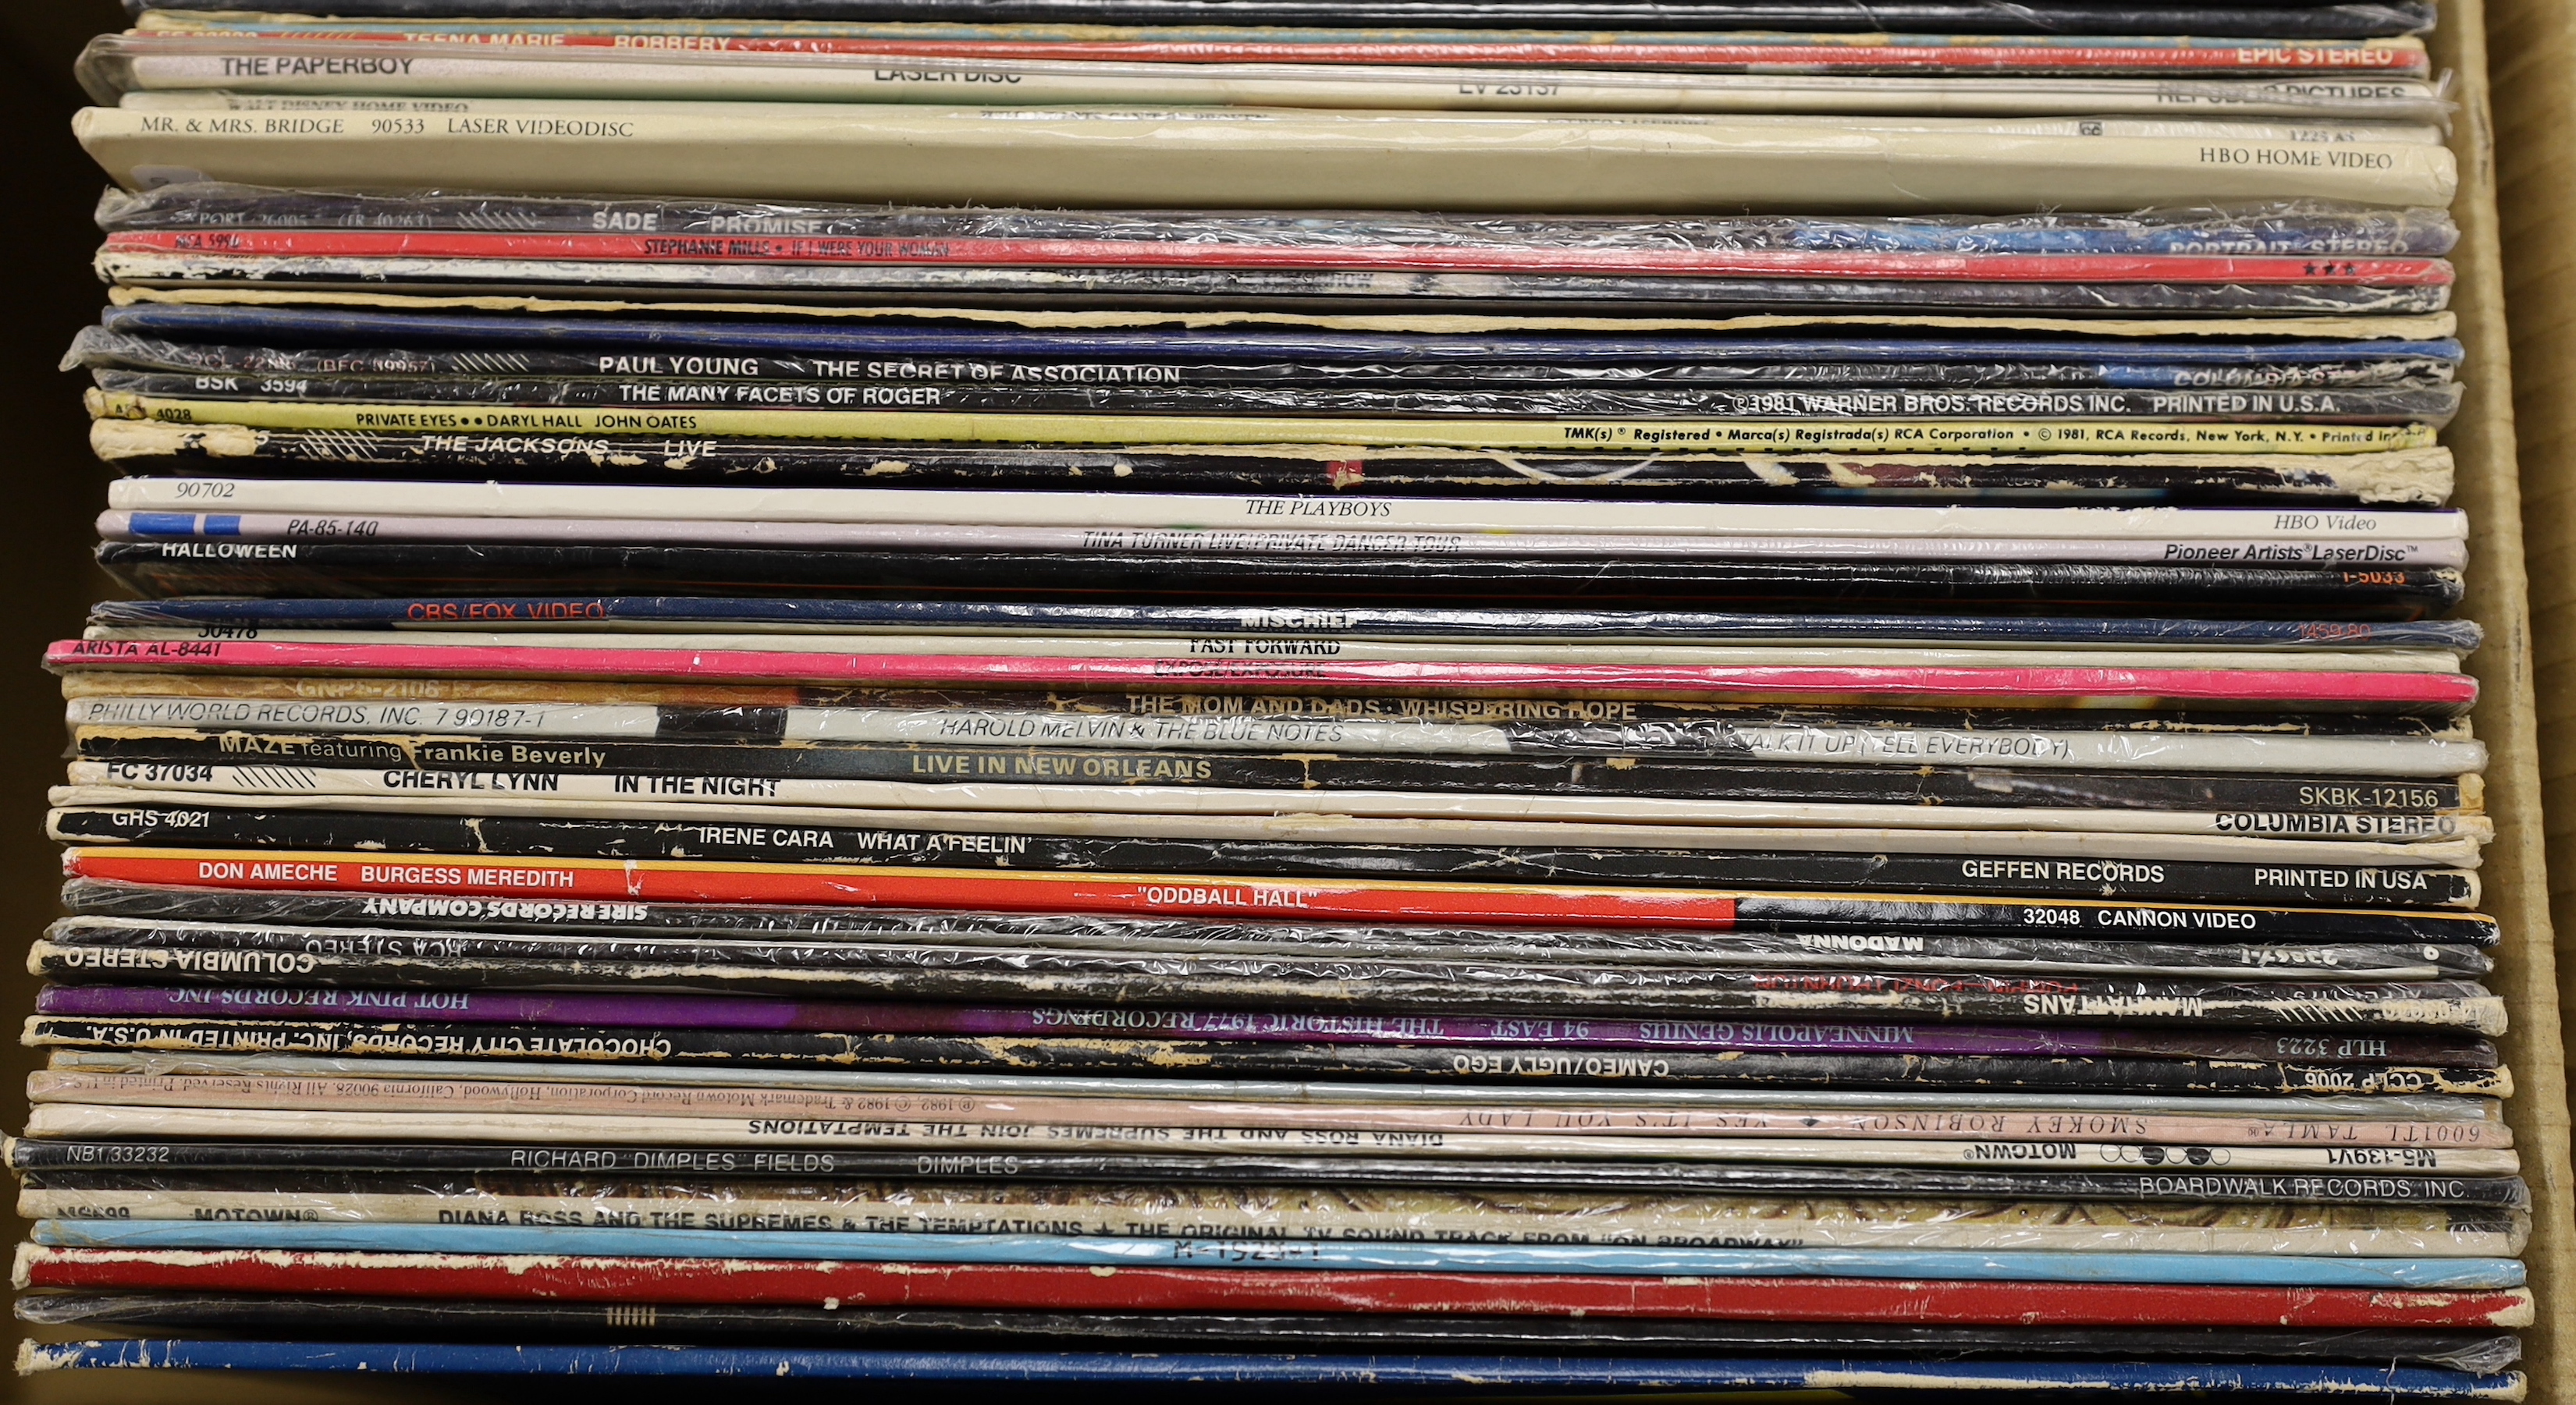 One hundred and forty mostly 1970's/80's LPs, including the time, Frank Zappa, Stevie Wonder, George, Michael, Diana Ross, Paul Young, etc.